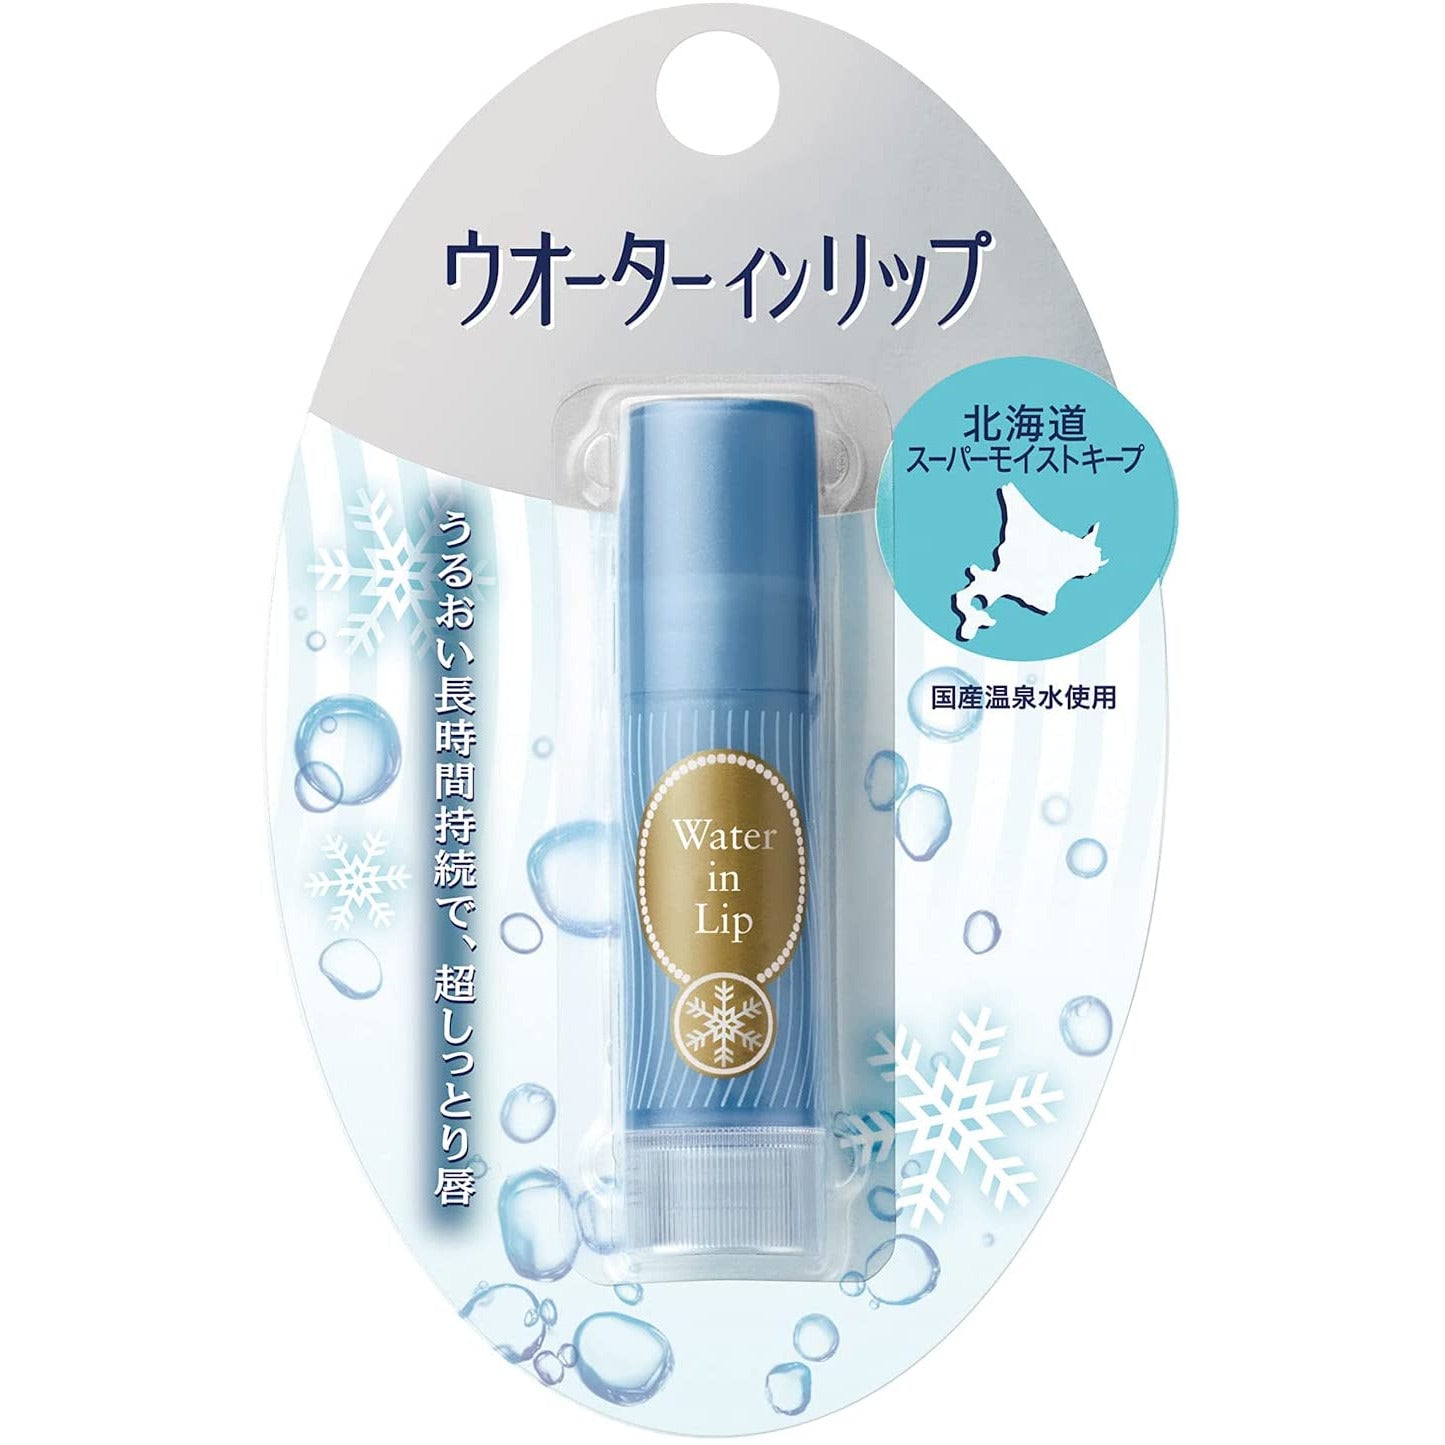 SHISEIDO Water-in-Lip Super Moist Keep SPF12 PA+ 3.5g Transparent and colorless